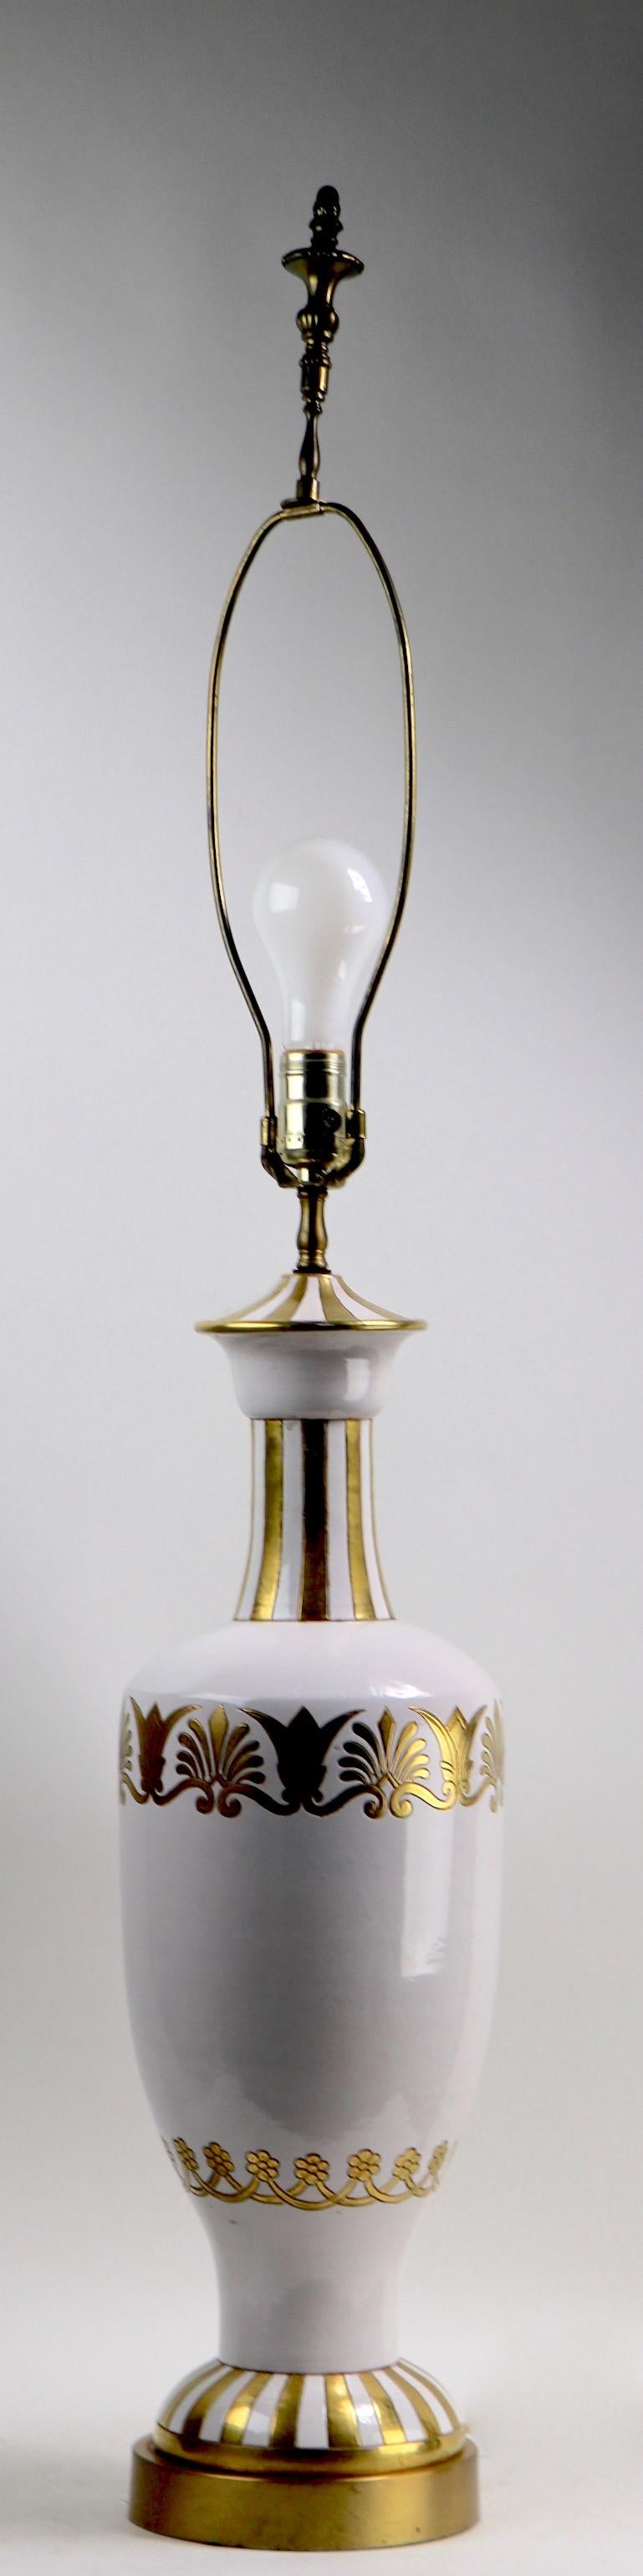 Hollywood Regency Ceramic White and Gold Gilt Table Lamp by Ugo Zaccagnini For Sale